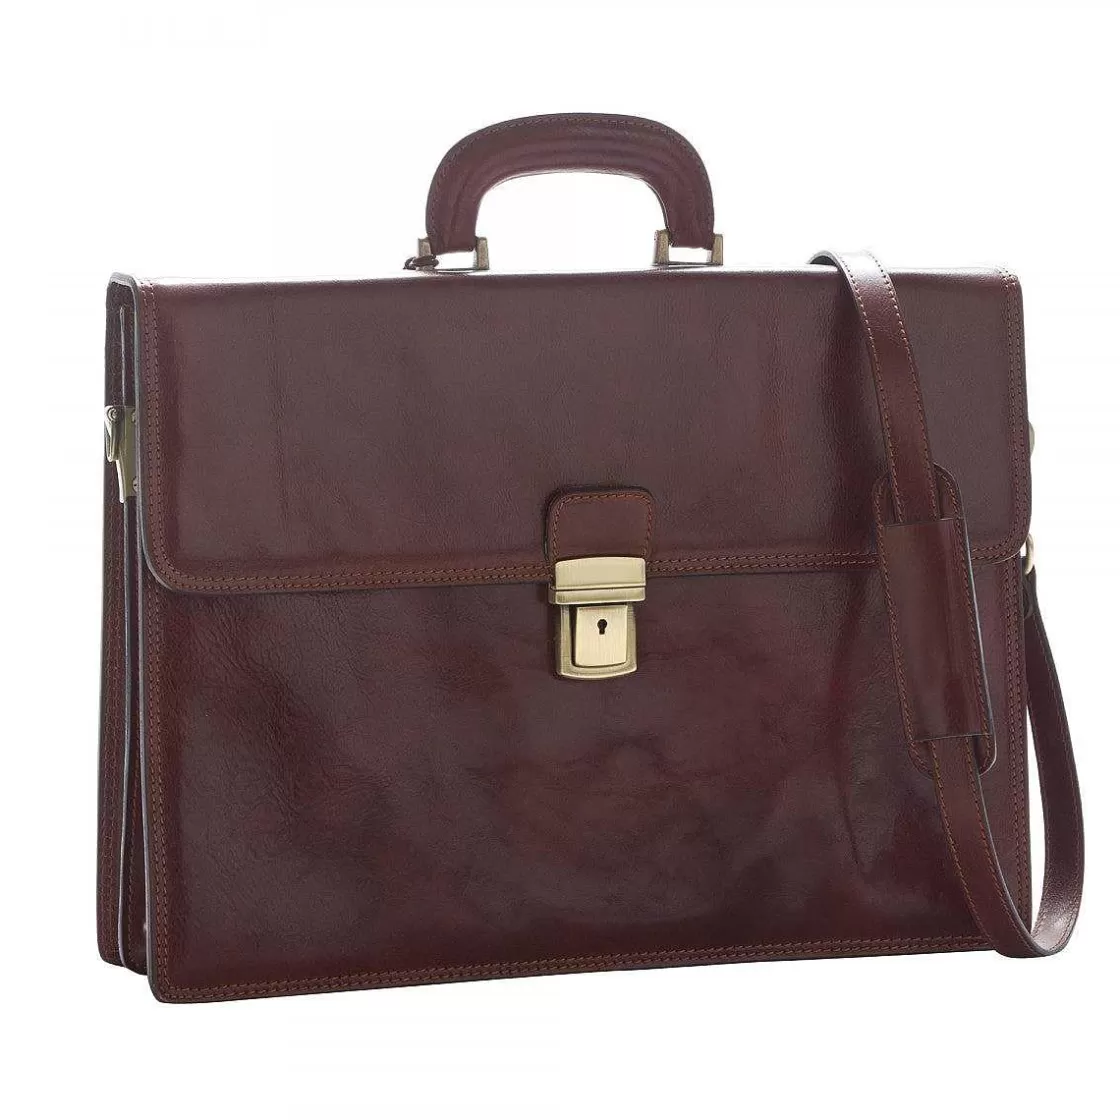 Leonardo Professional Briefcase In Full Grain Leather With Flap Closure, Adjustable Shoulder Strap, Double Compartment Cheap